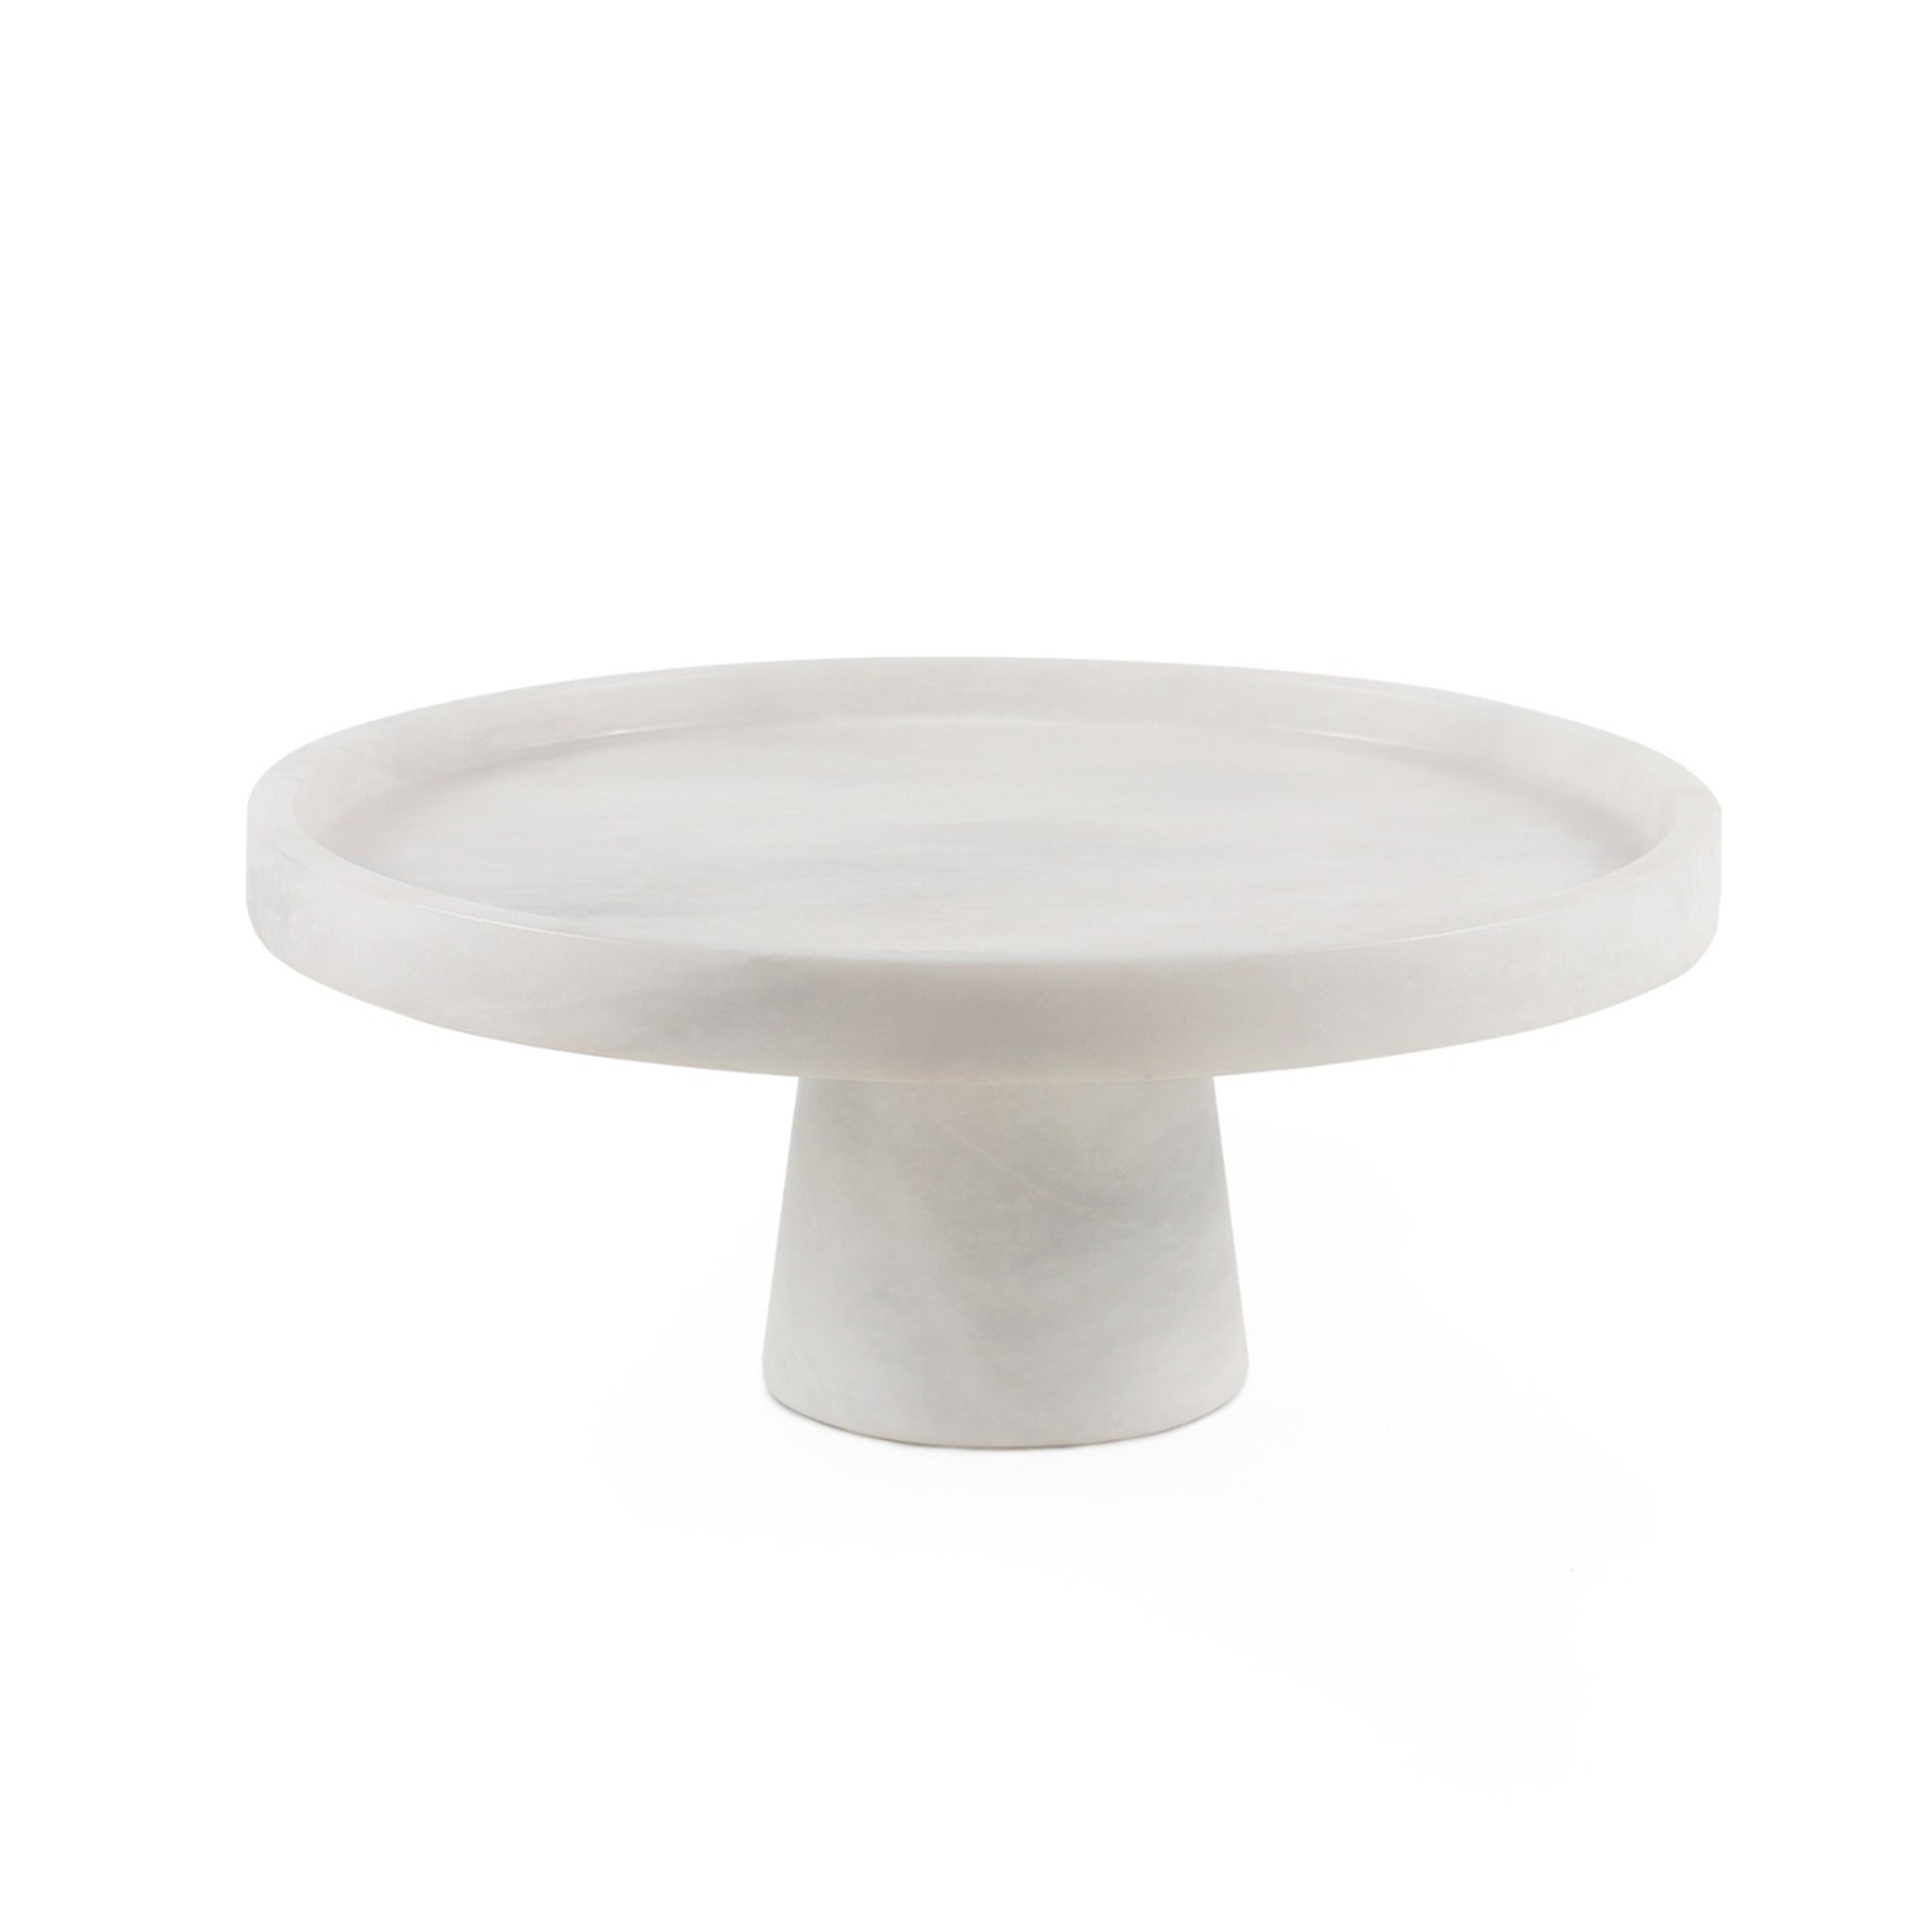 Find Quality Marble Cake Stand 12| Alibaba.com